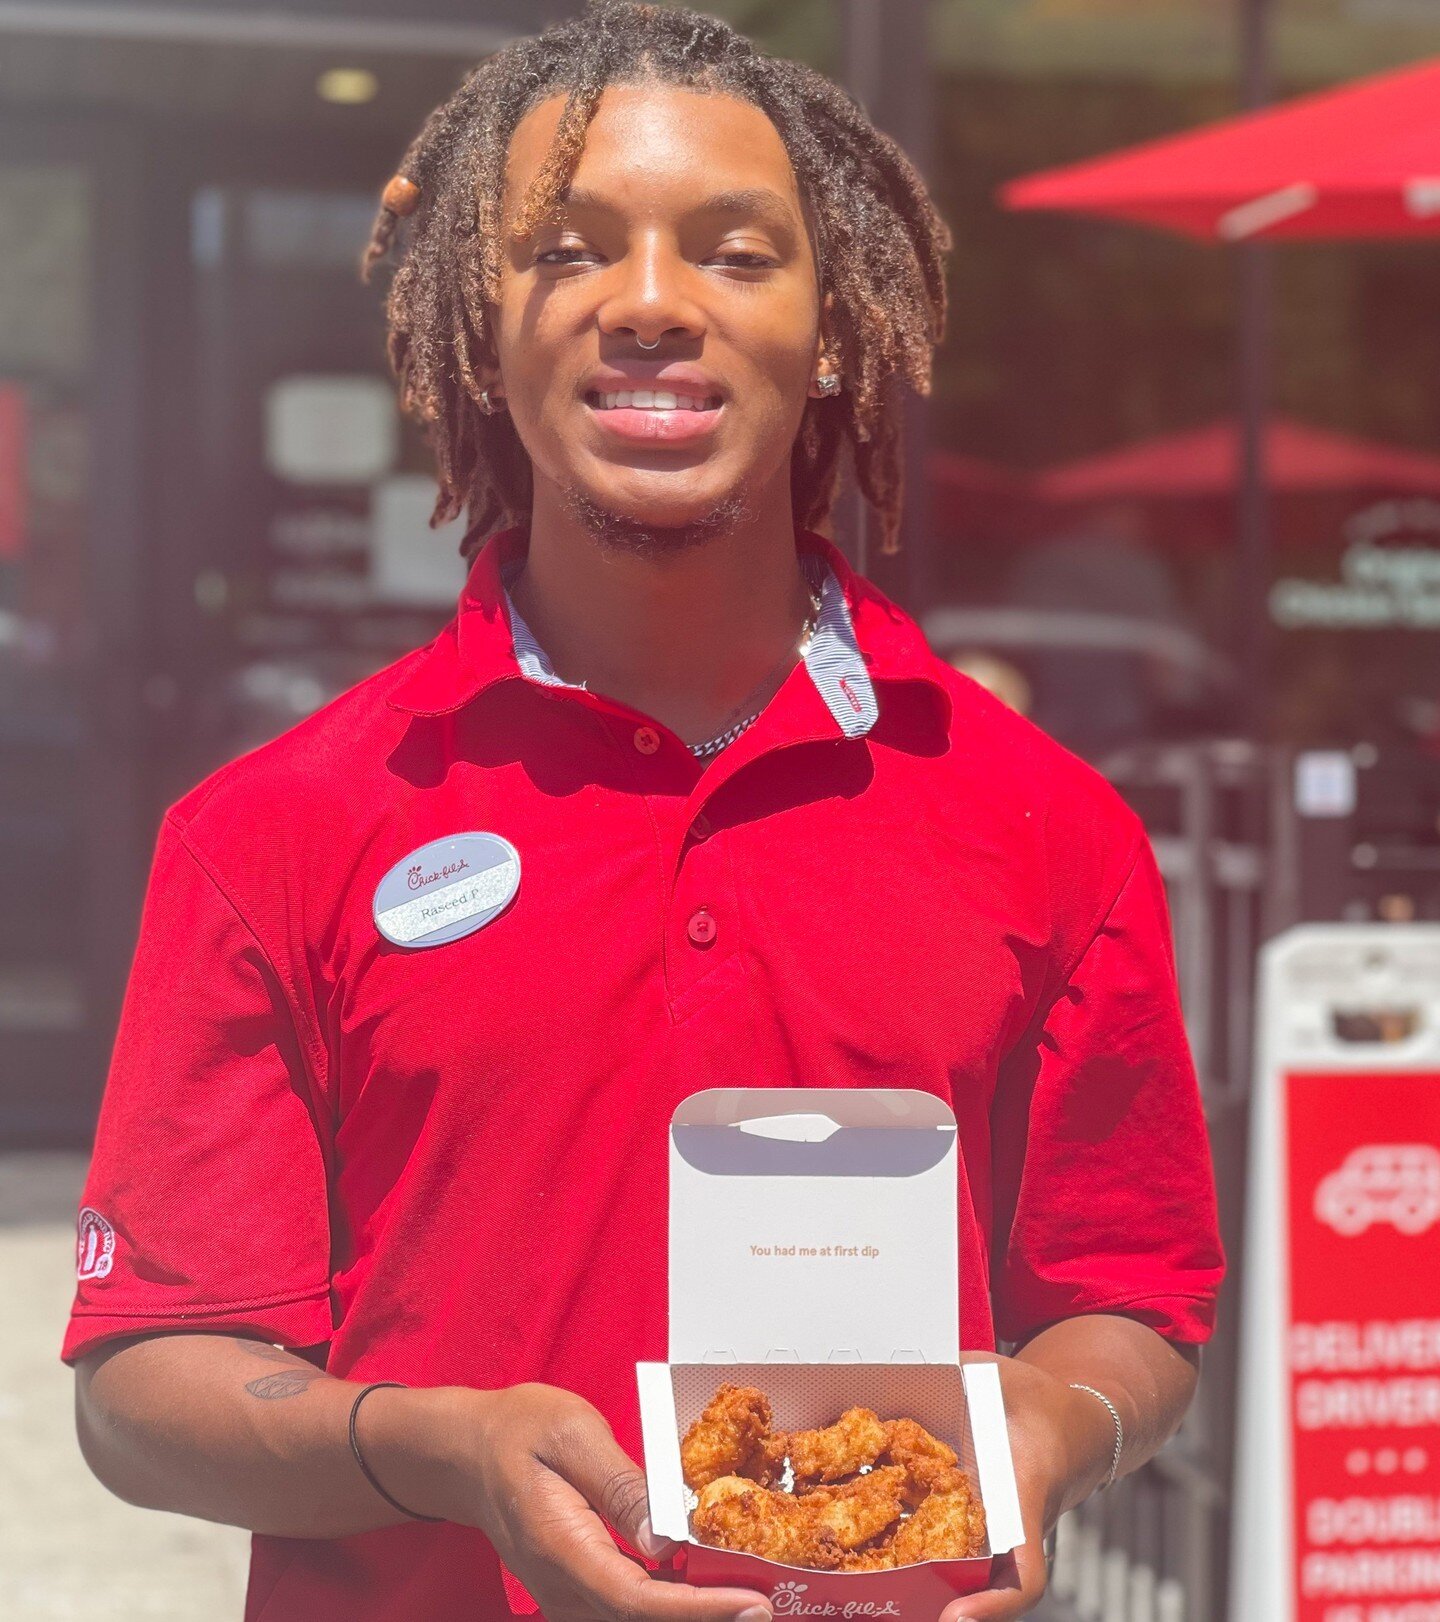 Calling all Chick-fil-A Nuggets fans 📢😃

Drop an emoji in the comments if you love Nuggets!
&bull;
&bull;
&bull;
#TheLittleThings #ChickfilA #MyPleasure #EatMoreChicken #EatMorChikin #HereToServe #ChickfilAMoms #OurPleasure #CFAFamily #CFA #Chickfi